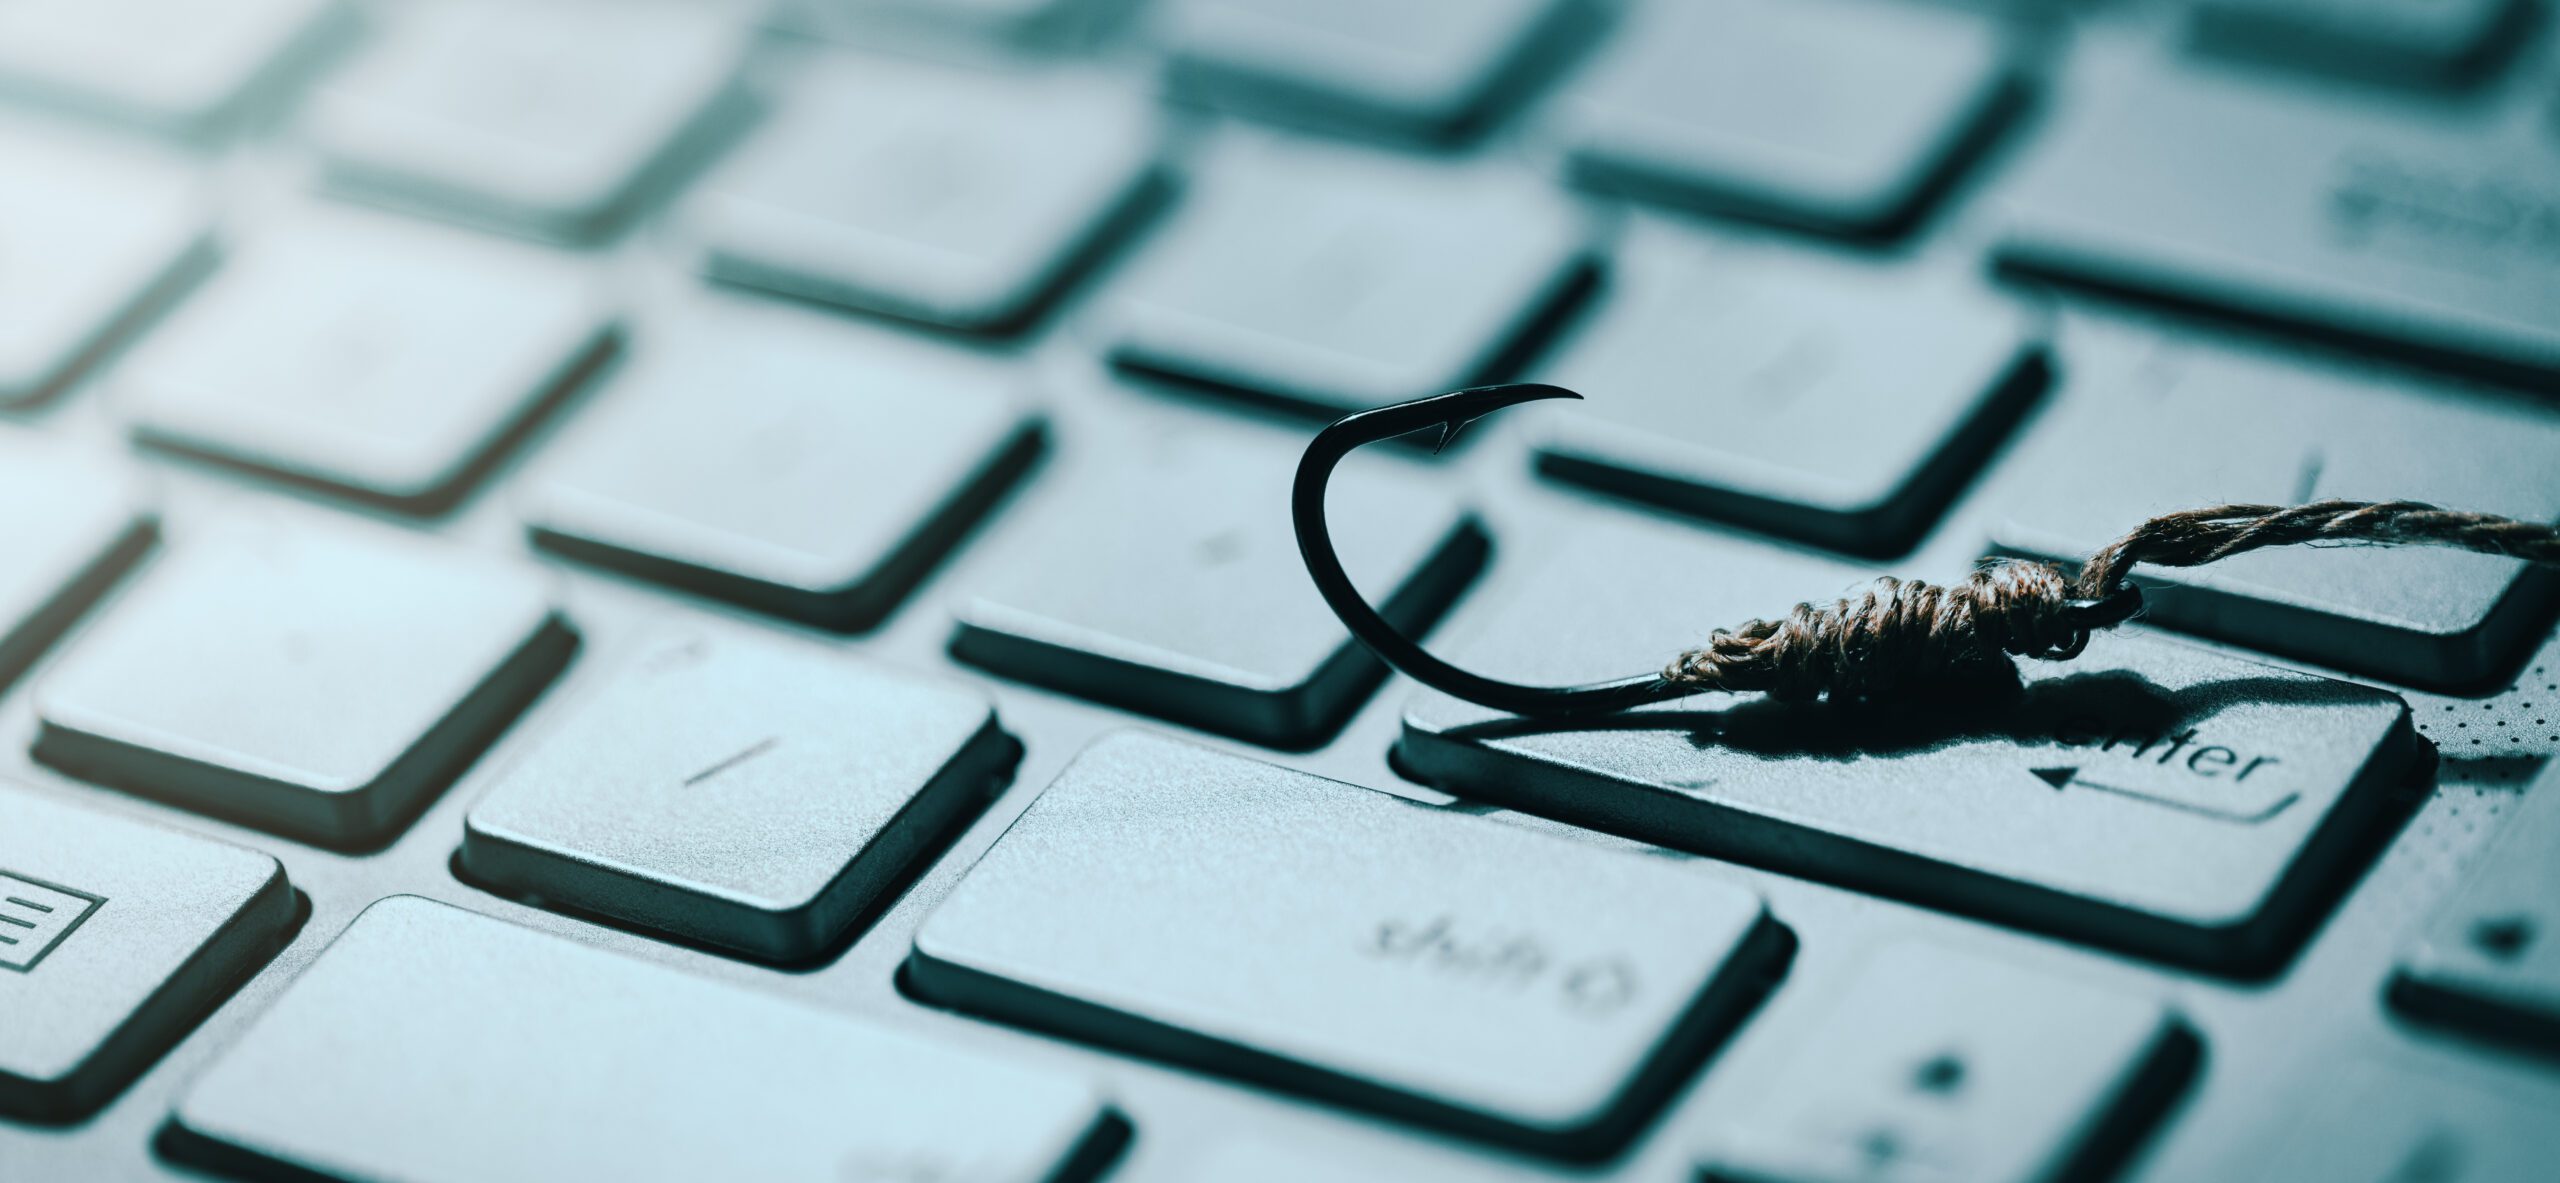 A fishing hook lies on a computer keyboard, symbolizing the concept of phishing in cybersecurity. The hook is prominently placed on the "Enter" key amidst the white keys, highlighting the threat of online scams and deceptive tactics.